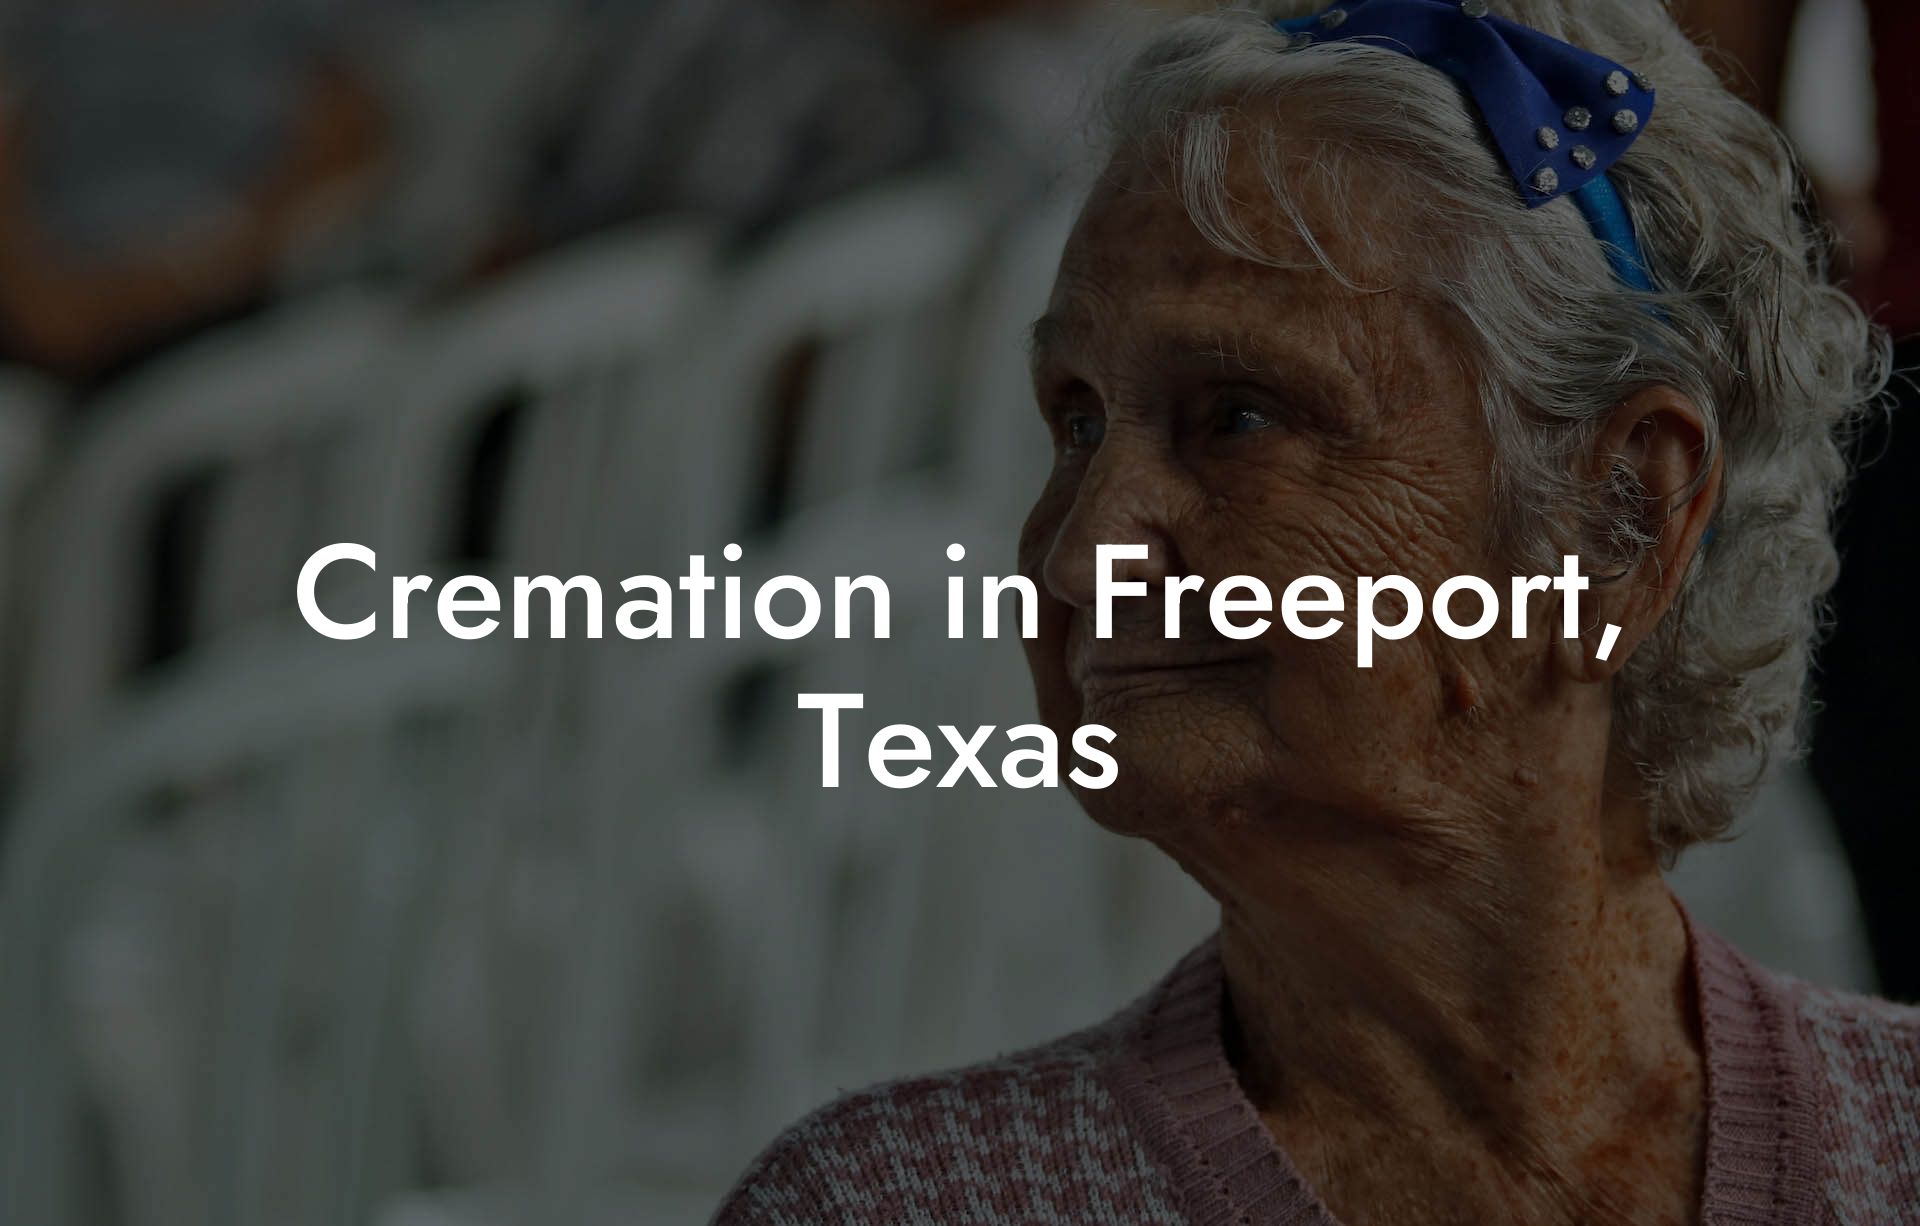 Cremation in Freeport, Texas